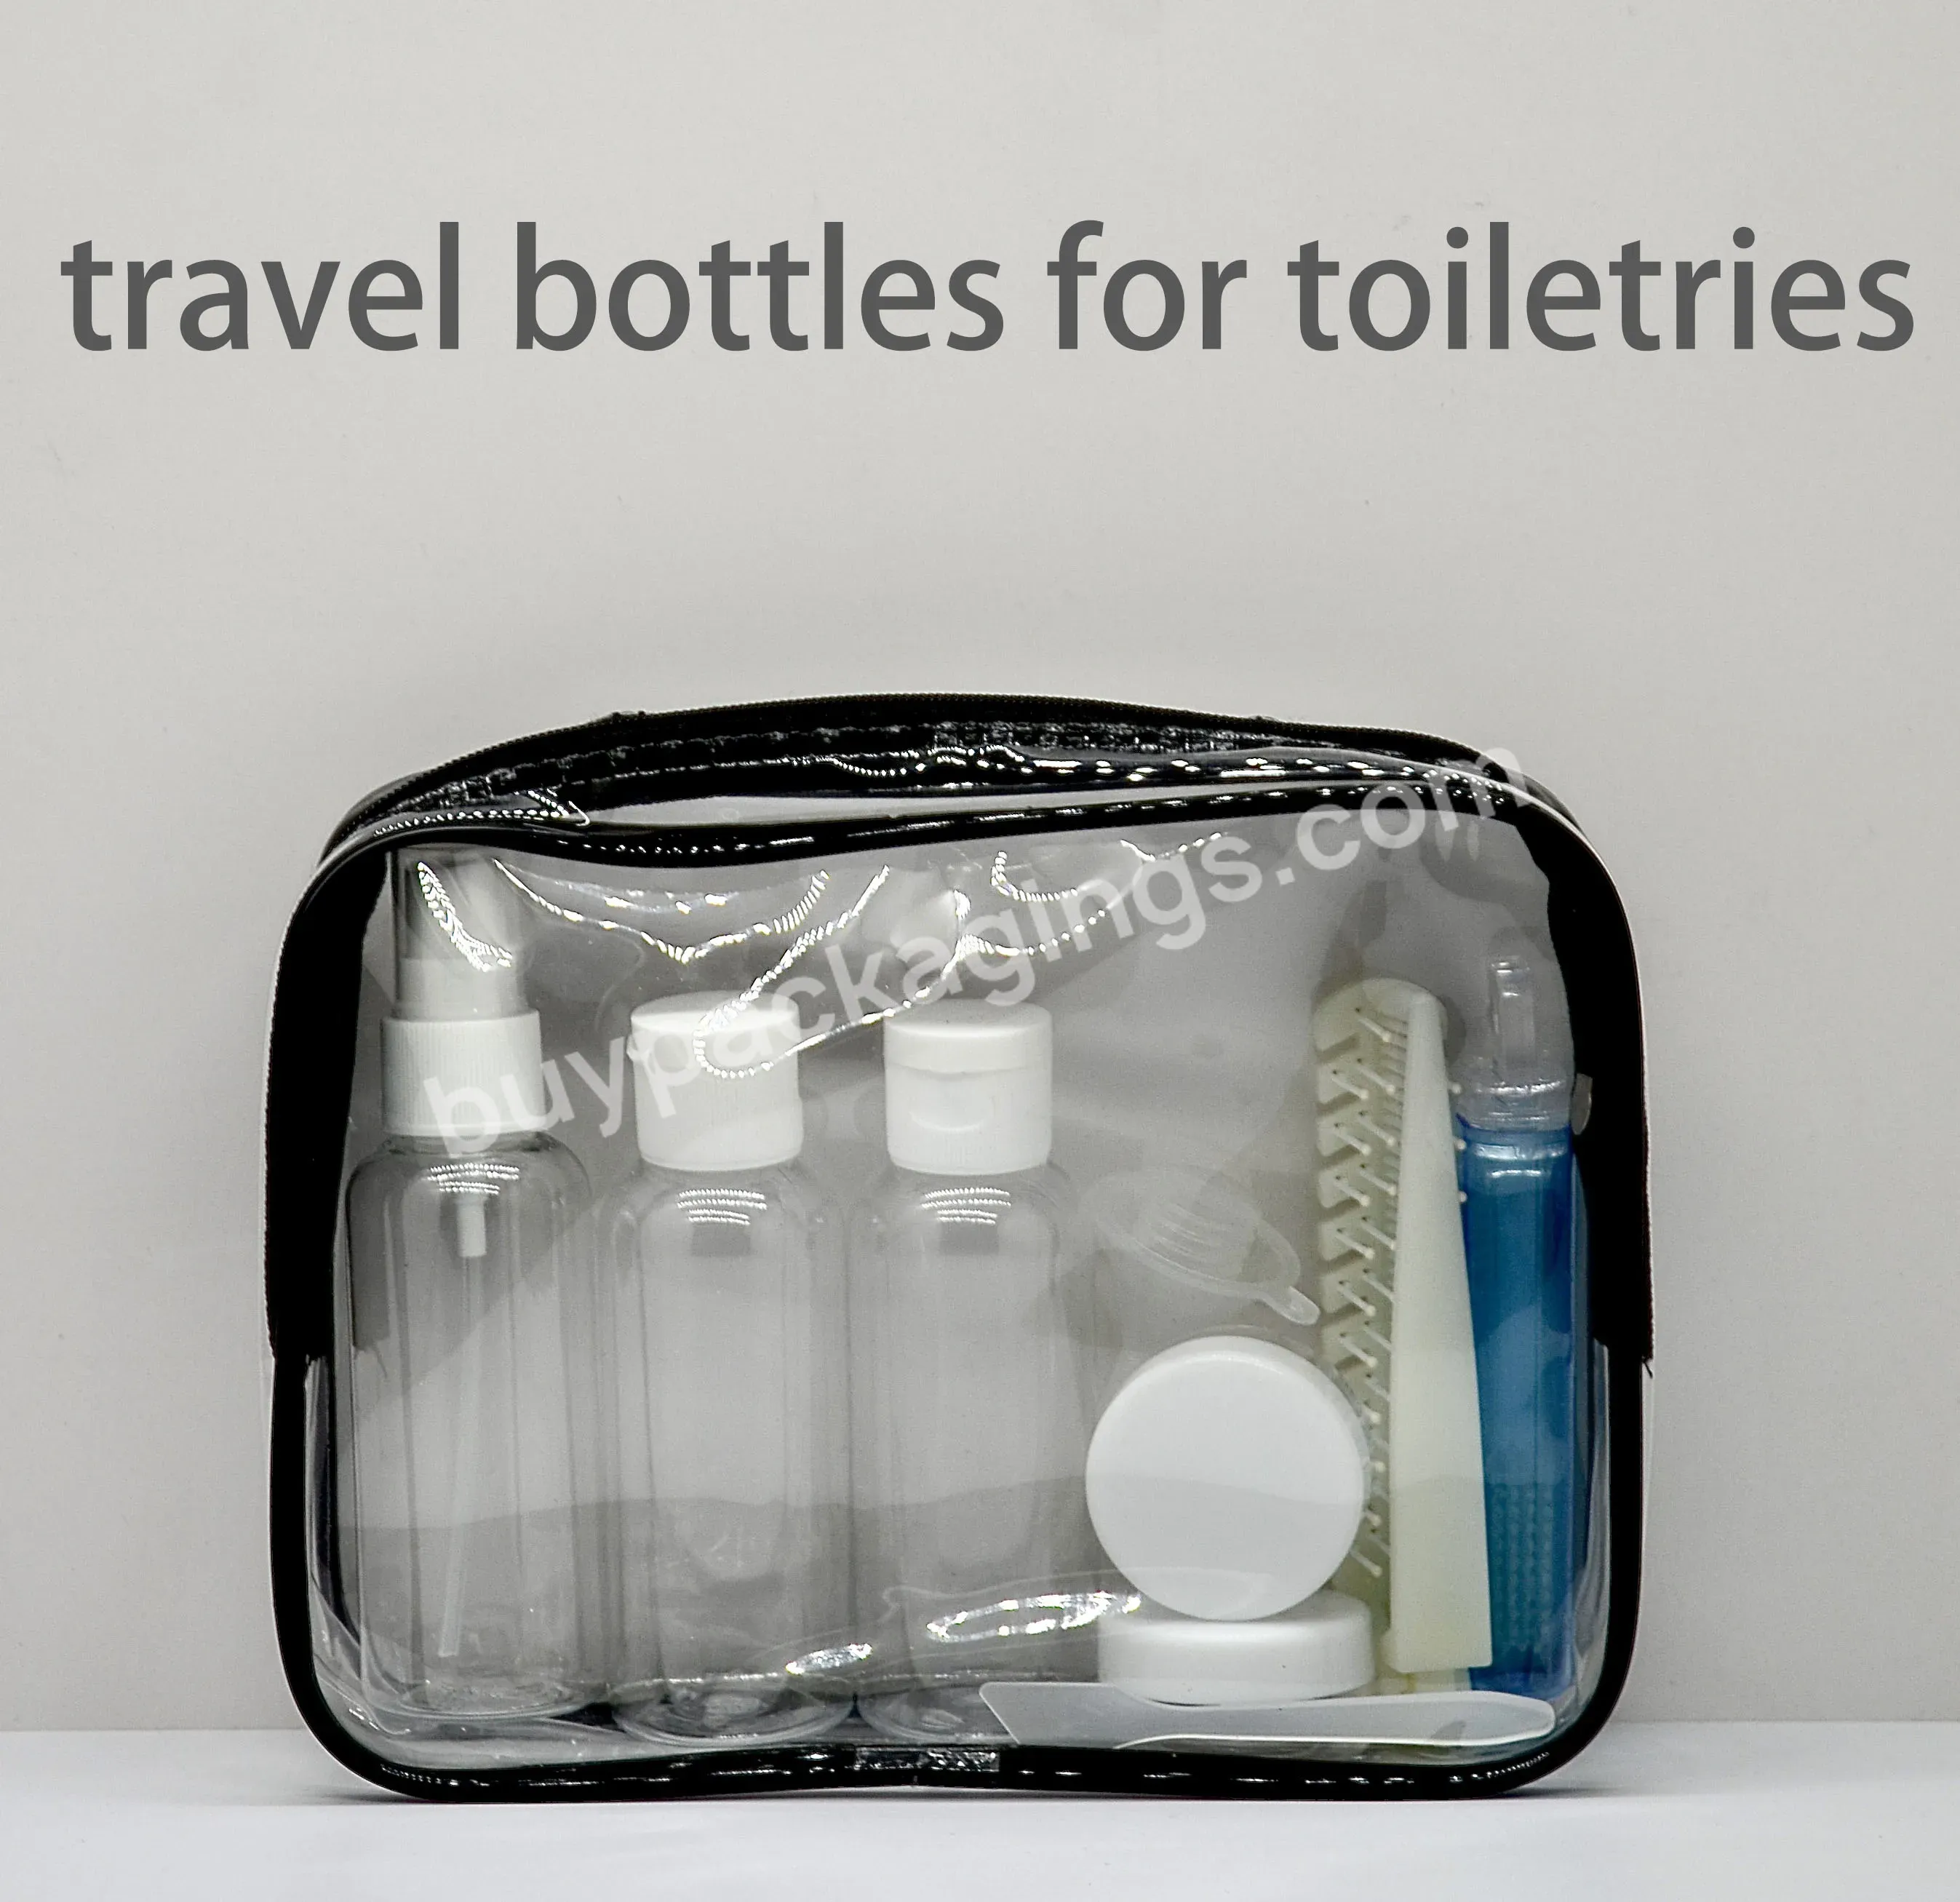 Leak-proof Toiletry Containers Cosmetic Travel Cosmetic Packing Bottle Custom Plastic Travel Bottles With Toothbrush And Comb - Buy Custom Travel Bottle Set,Travel Cosmetic Packing,Travel Bottles With Toothbrush And Comb.